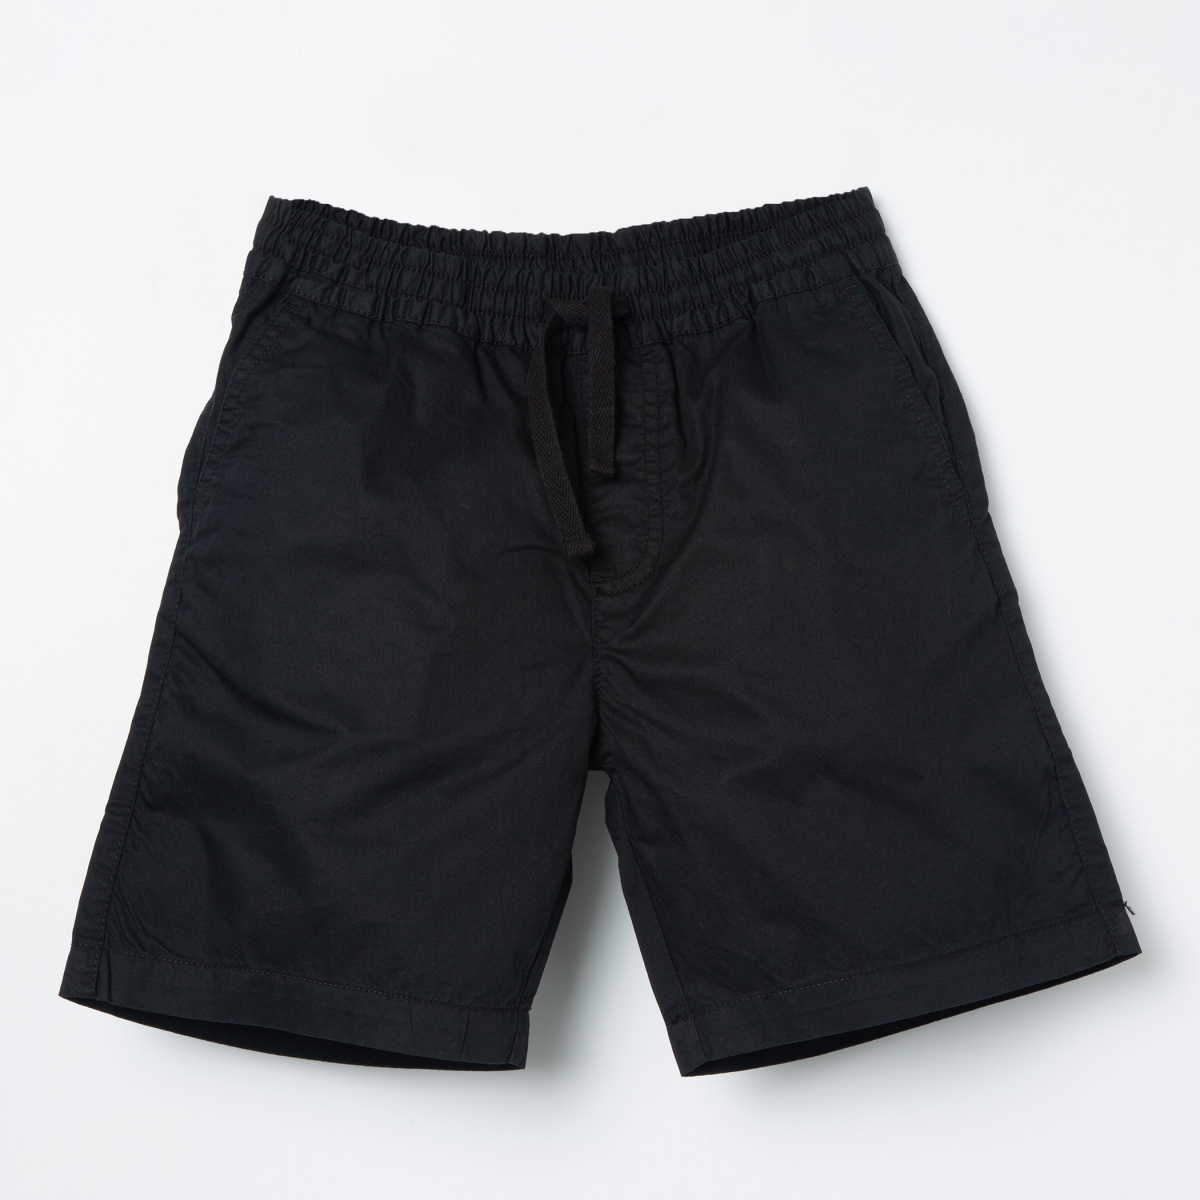 FAME FOREVER YOUNG Solid Drawstring Waist Shorts